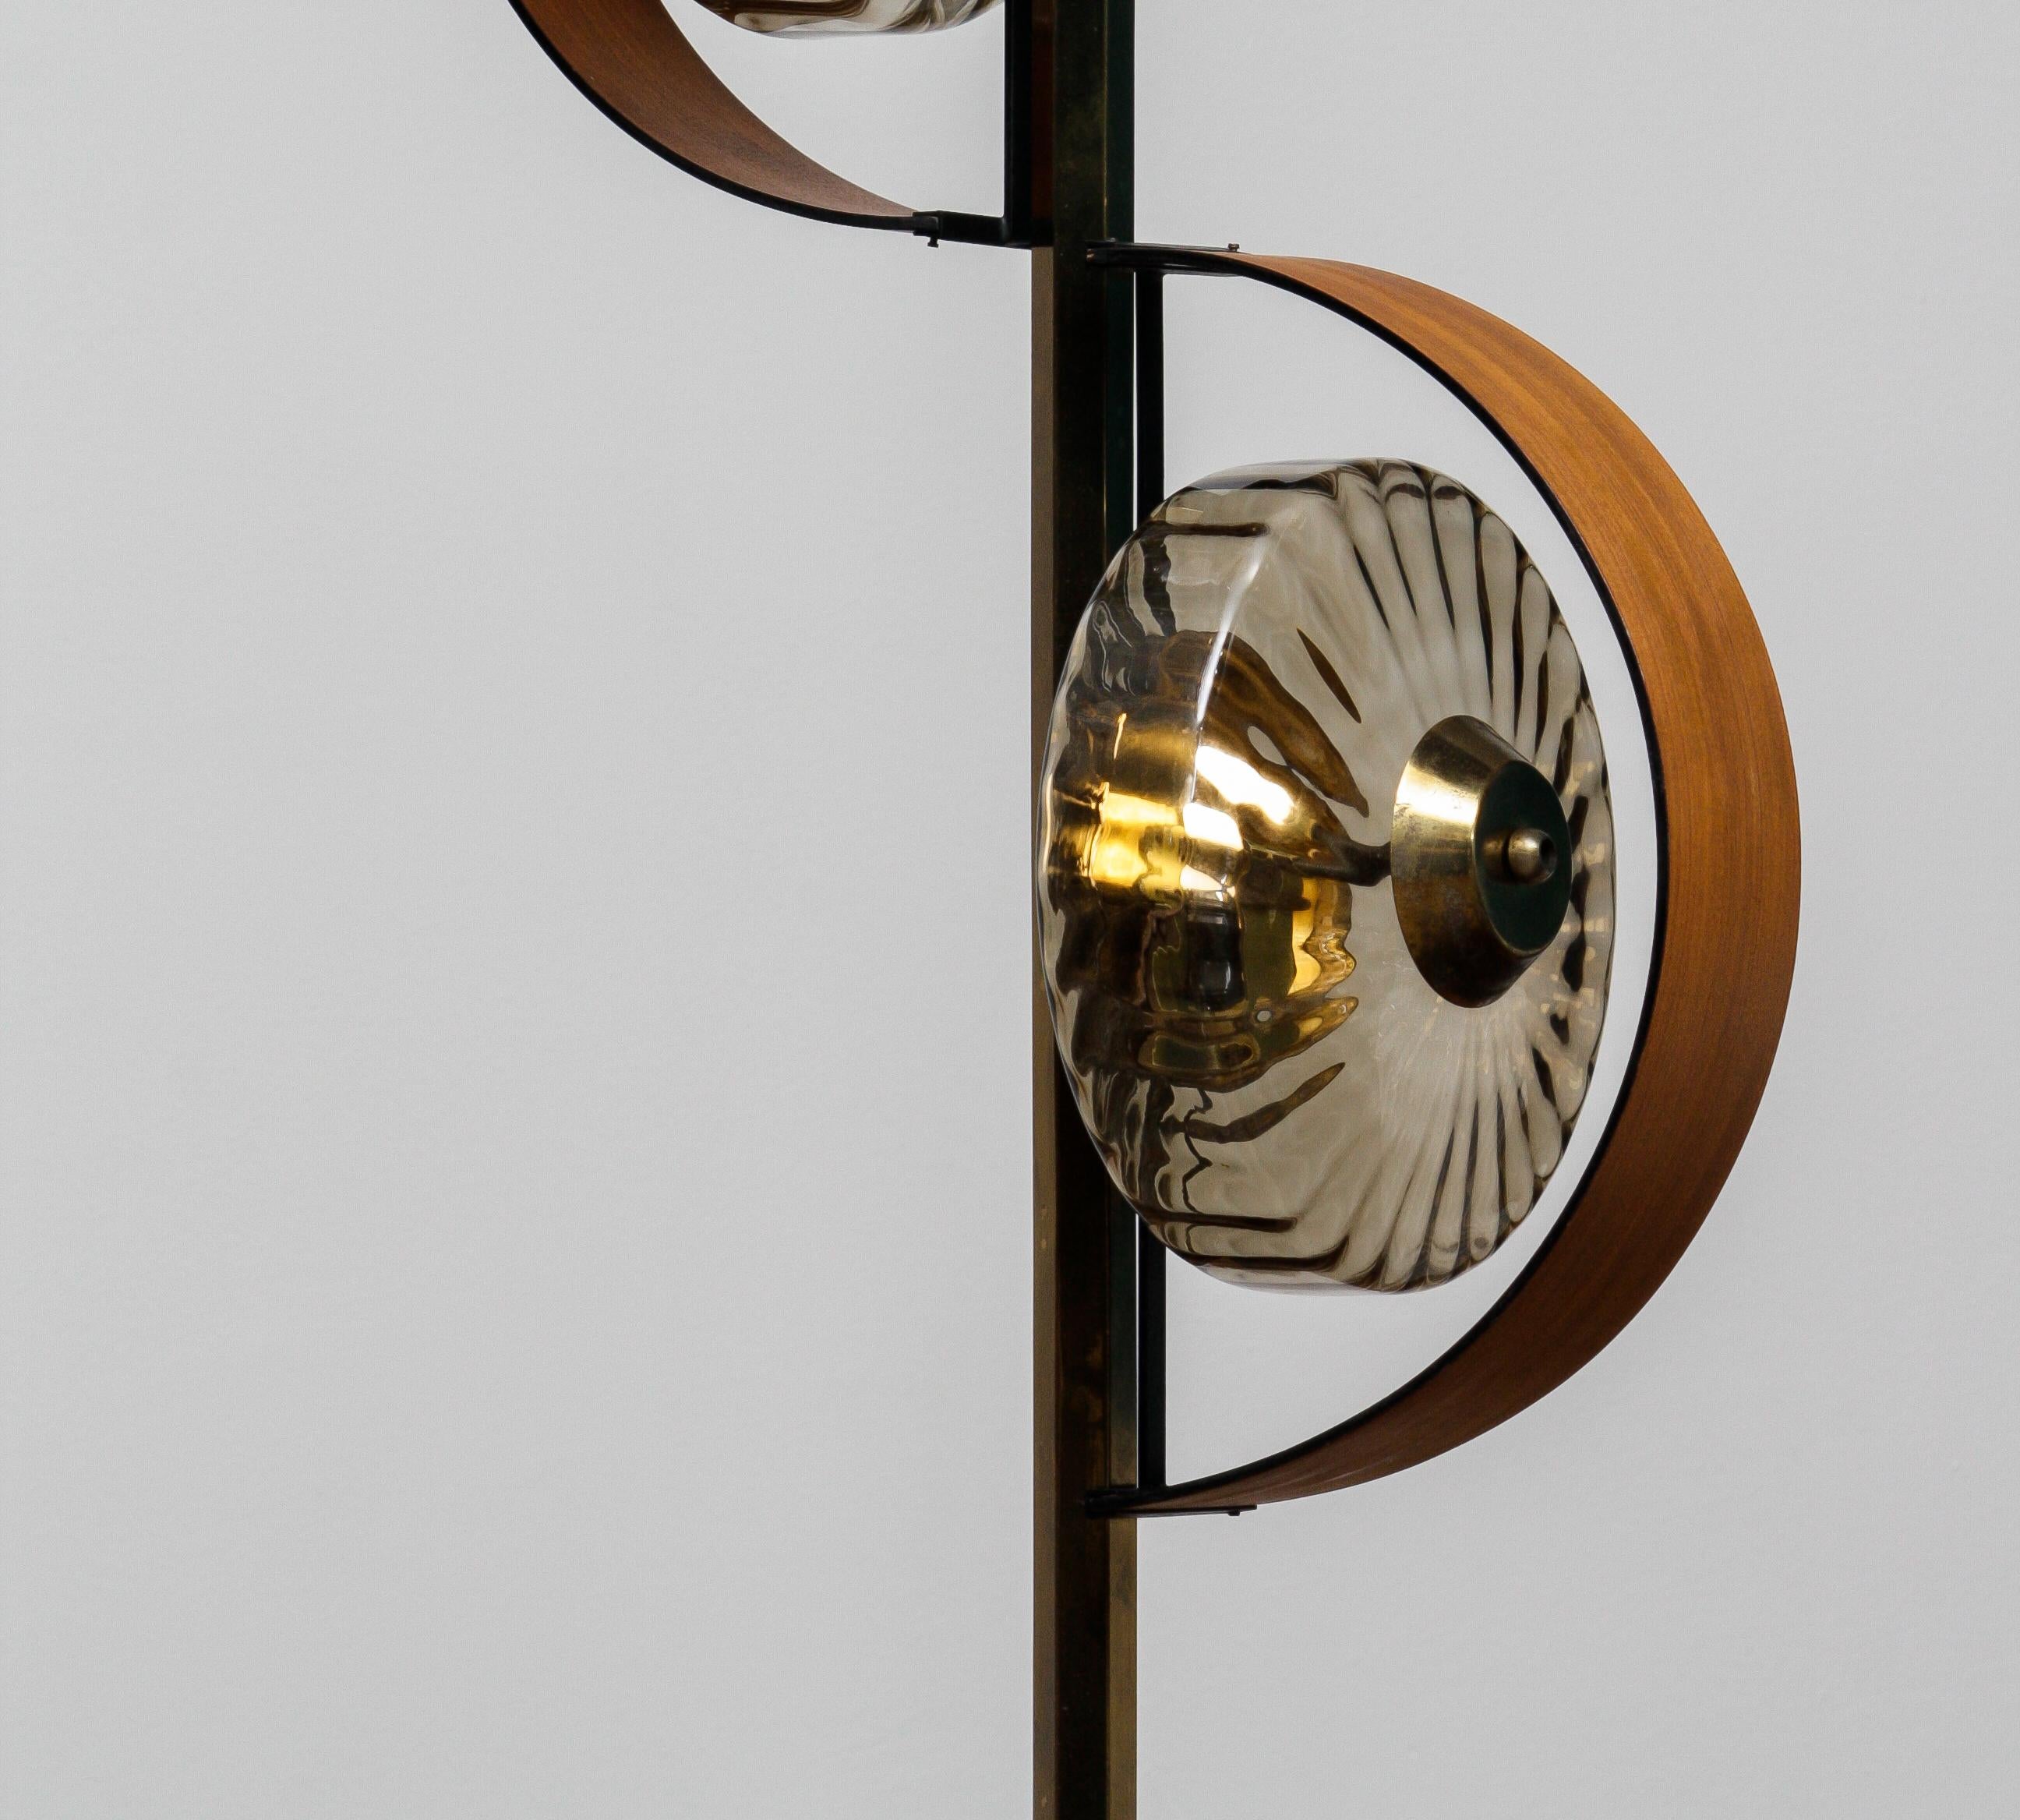 Mid-Century Modern 1950s Italian Floor Lamp Made in Brass and Teak with Smoked Glass Shades